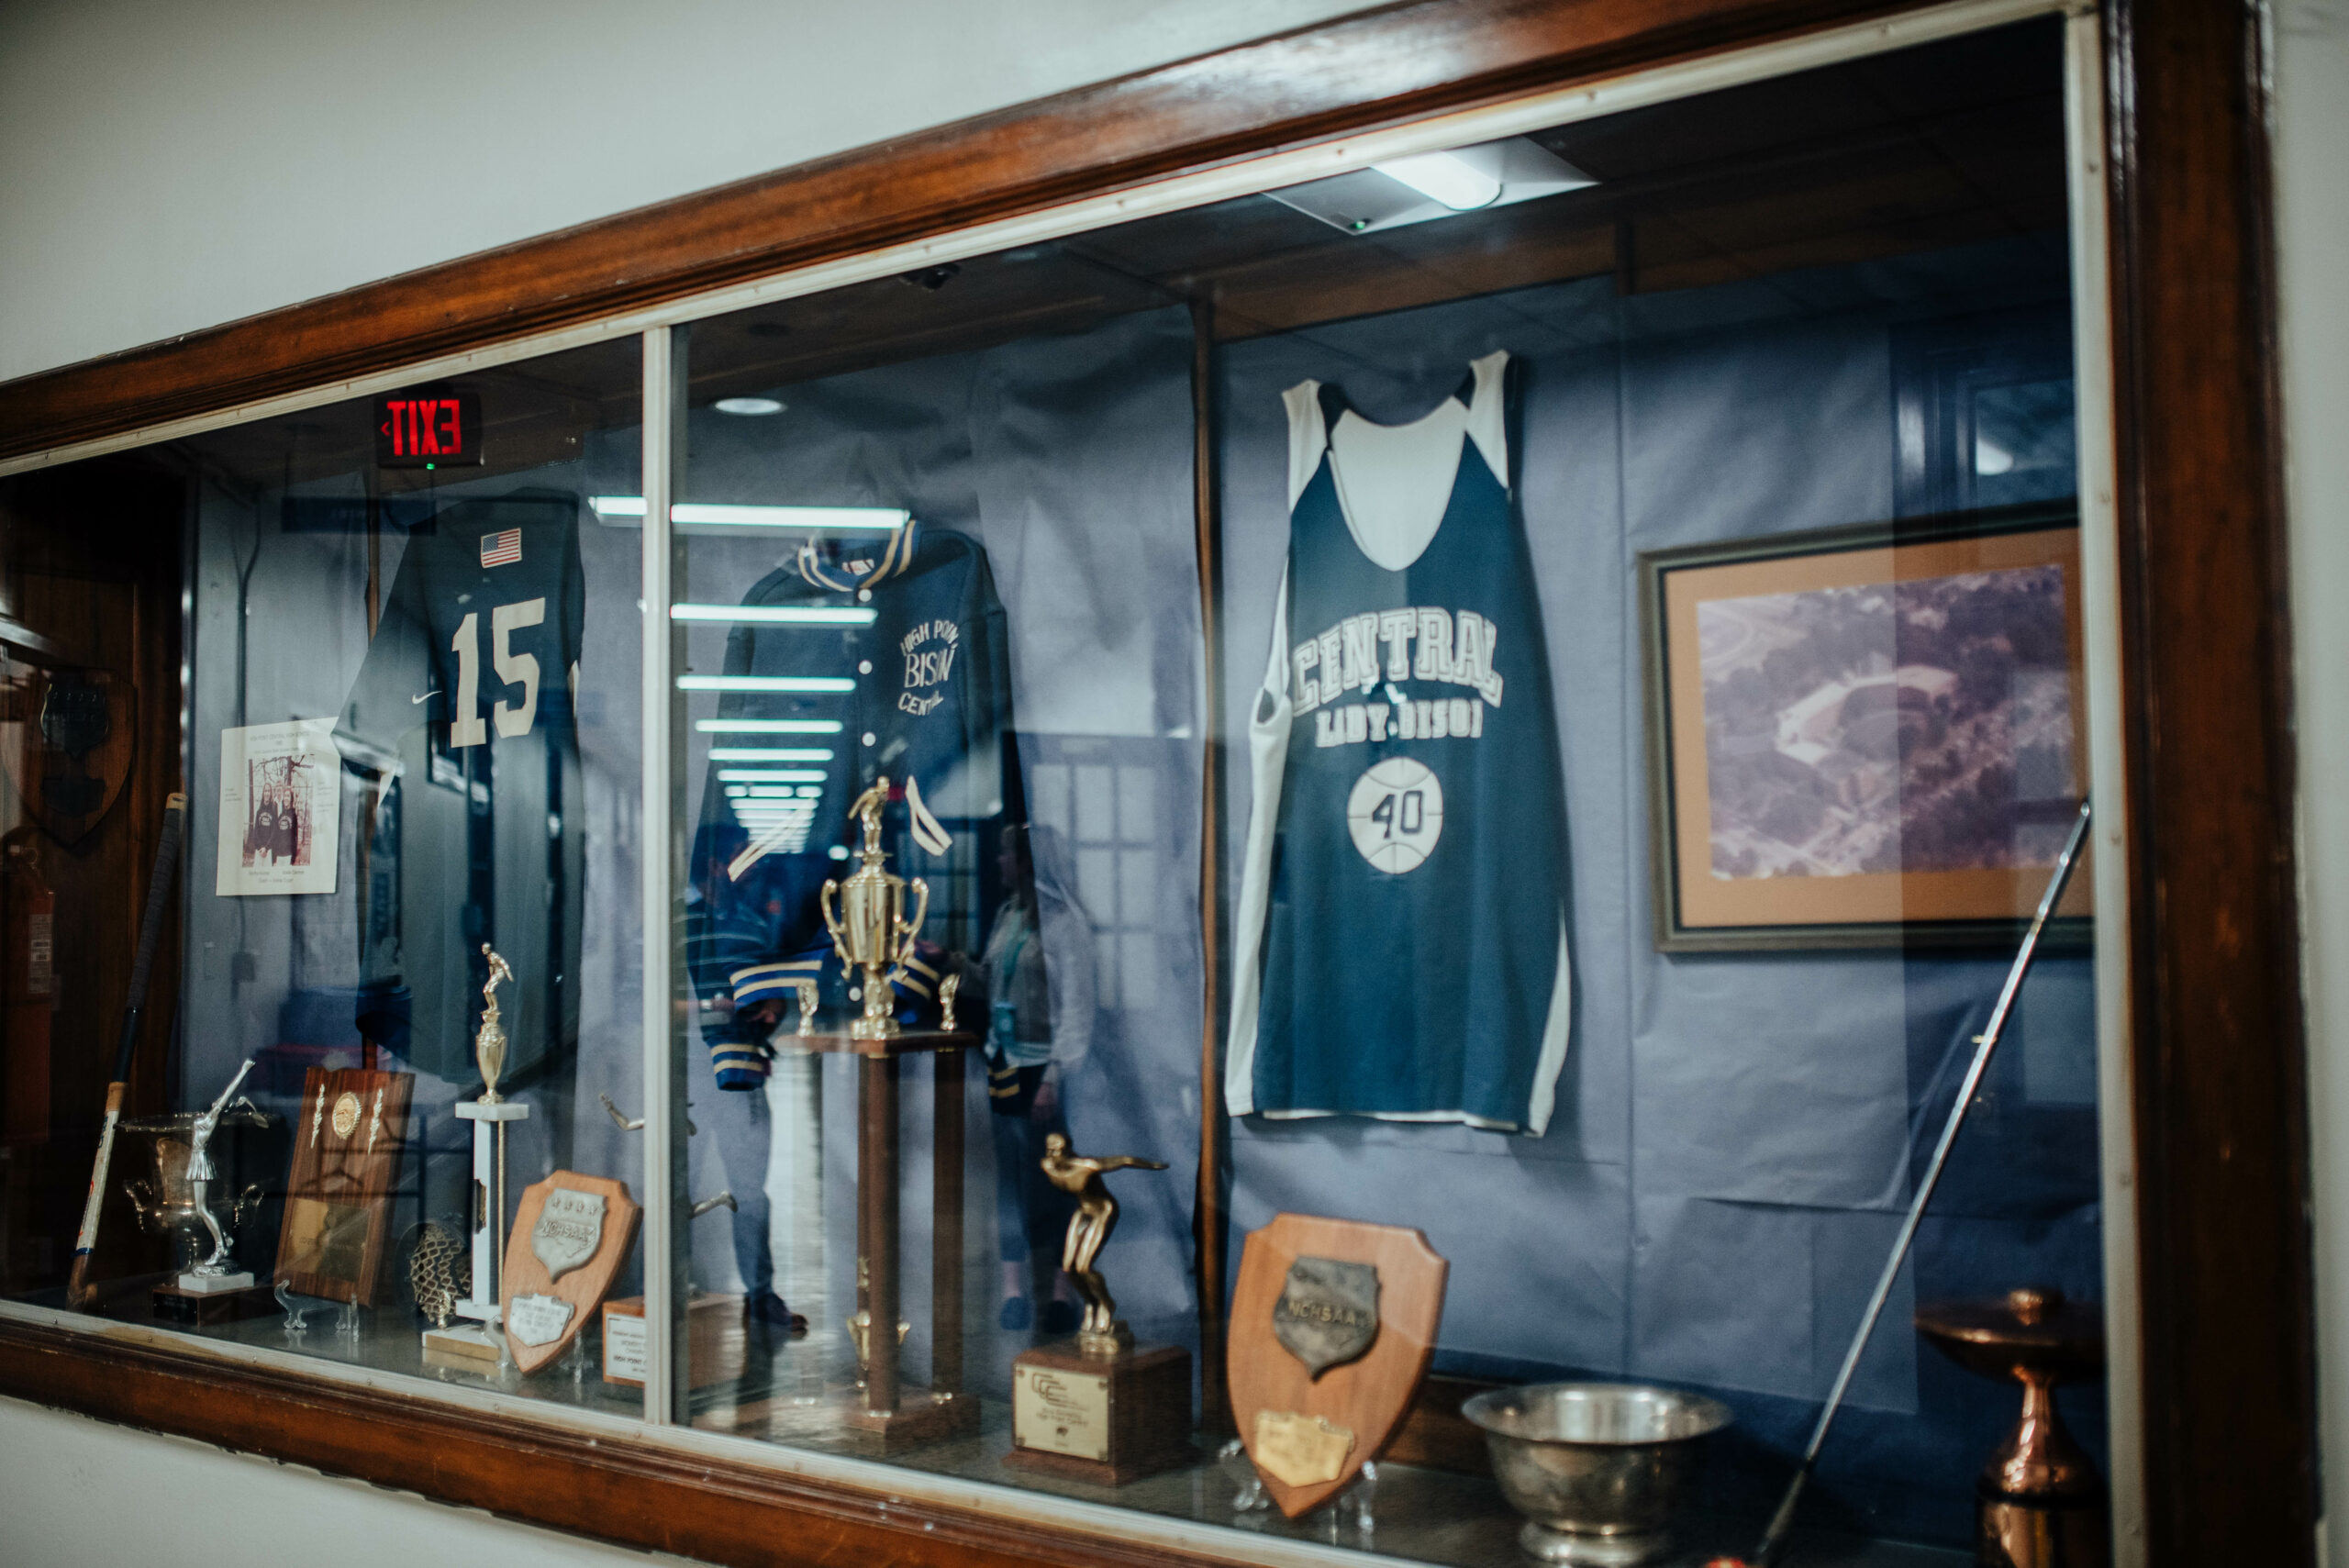 Old jerseys and awards at HP Central hang in the hallways.